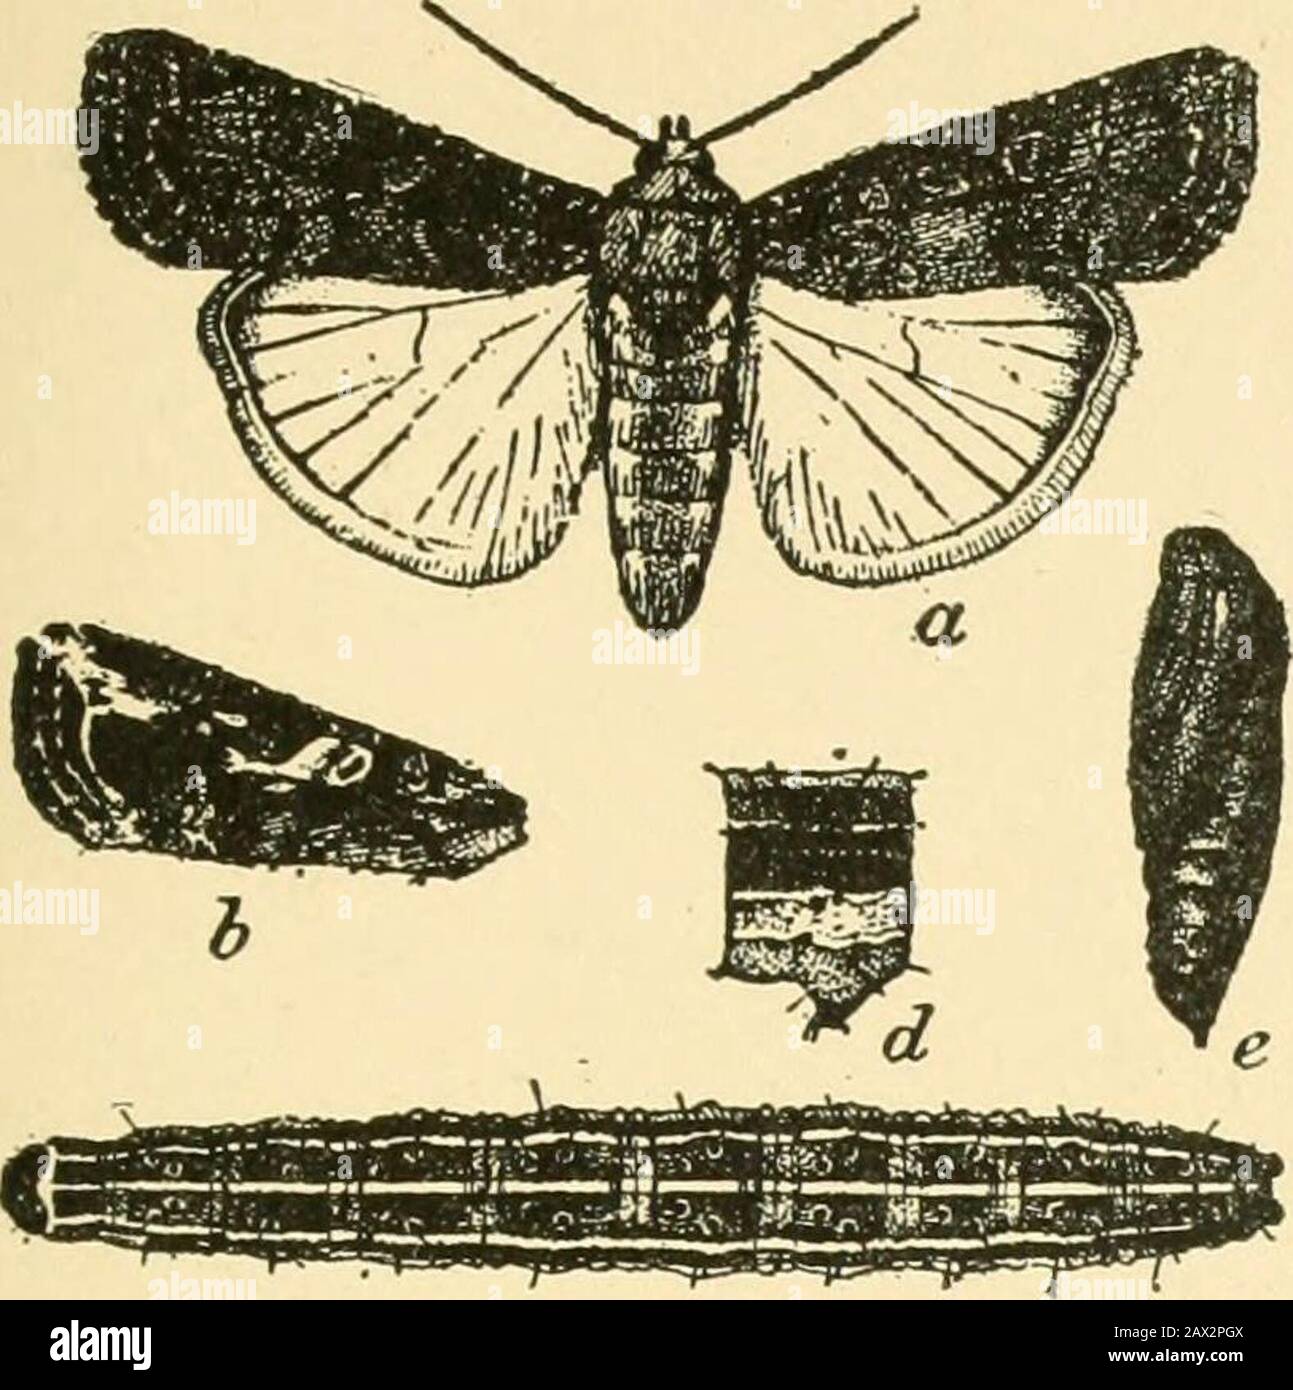 Farm crops, their cultivation and management, a non-technical manual for the cultivation, management and improvement of farm crops . Cotton Worm (Alabama argillacea).^Stages and work. Bur. Ent. Cir. 153. (25G) INSECT PESTS AND THEIR CONTROL 257. c Fall Army Worm{Laphygma frugiperda).^ A—Moth, plain gray form. Bwing of prodenia-like form. C—Larvaextended. D—Abdominal segment oflarva, lateral view; twice natural size.E—Pupa, lateral view. The Cotton Red Spider {Tetran-ychus bimaculatus, Harvey).—Thissmall red mite is common on cot-ton and on several other plants, es-pecially pokeweed and violet. Stock Photo